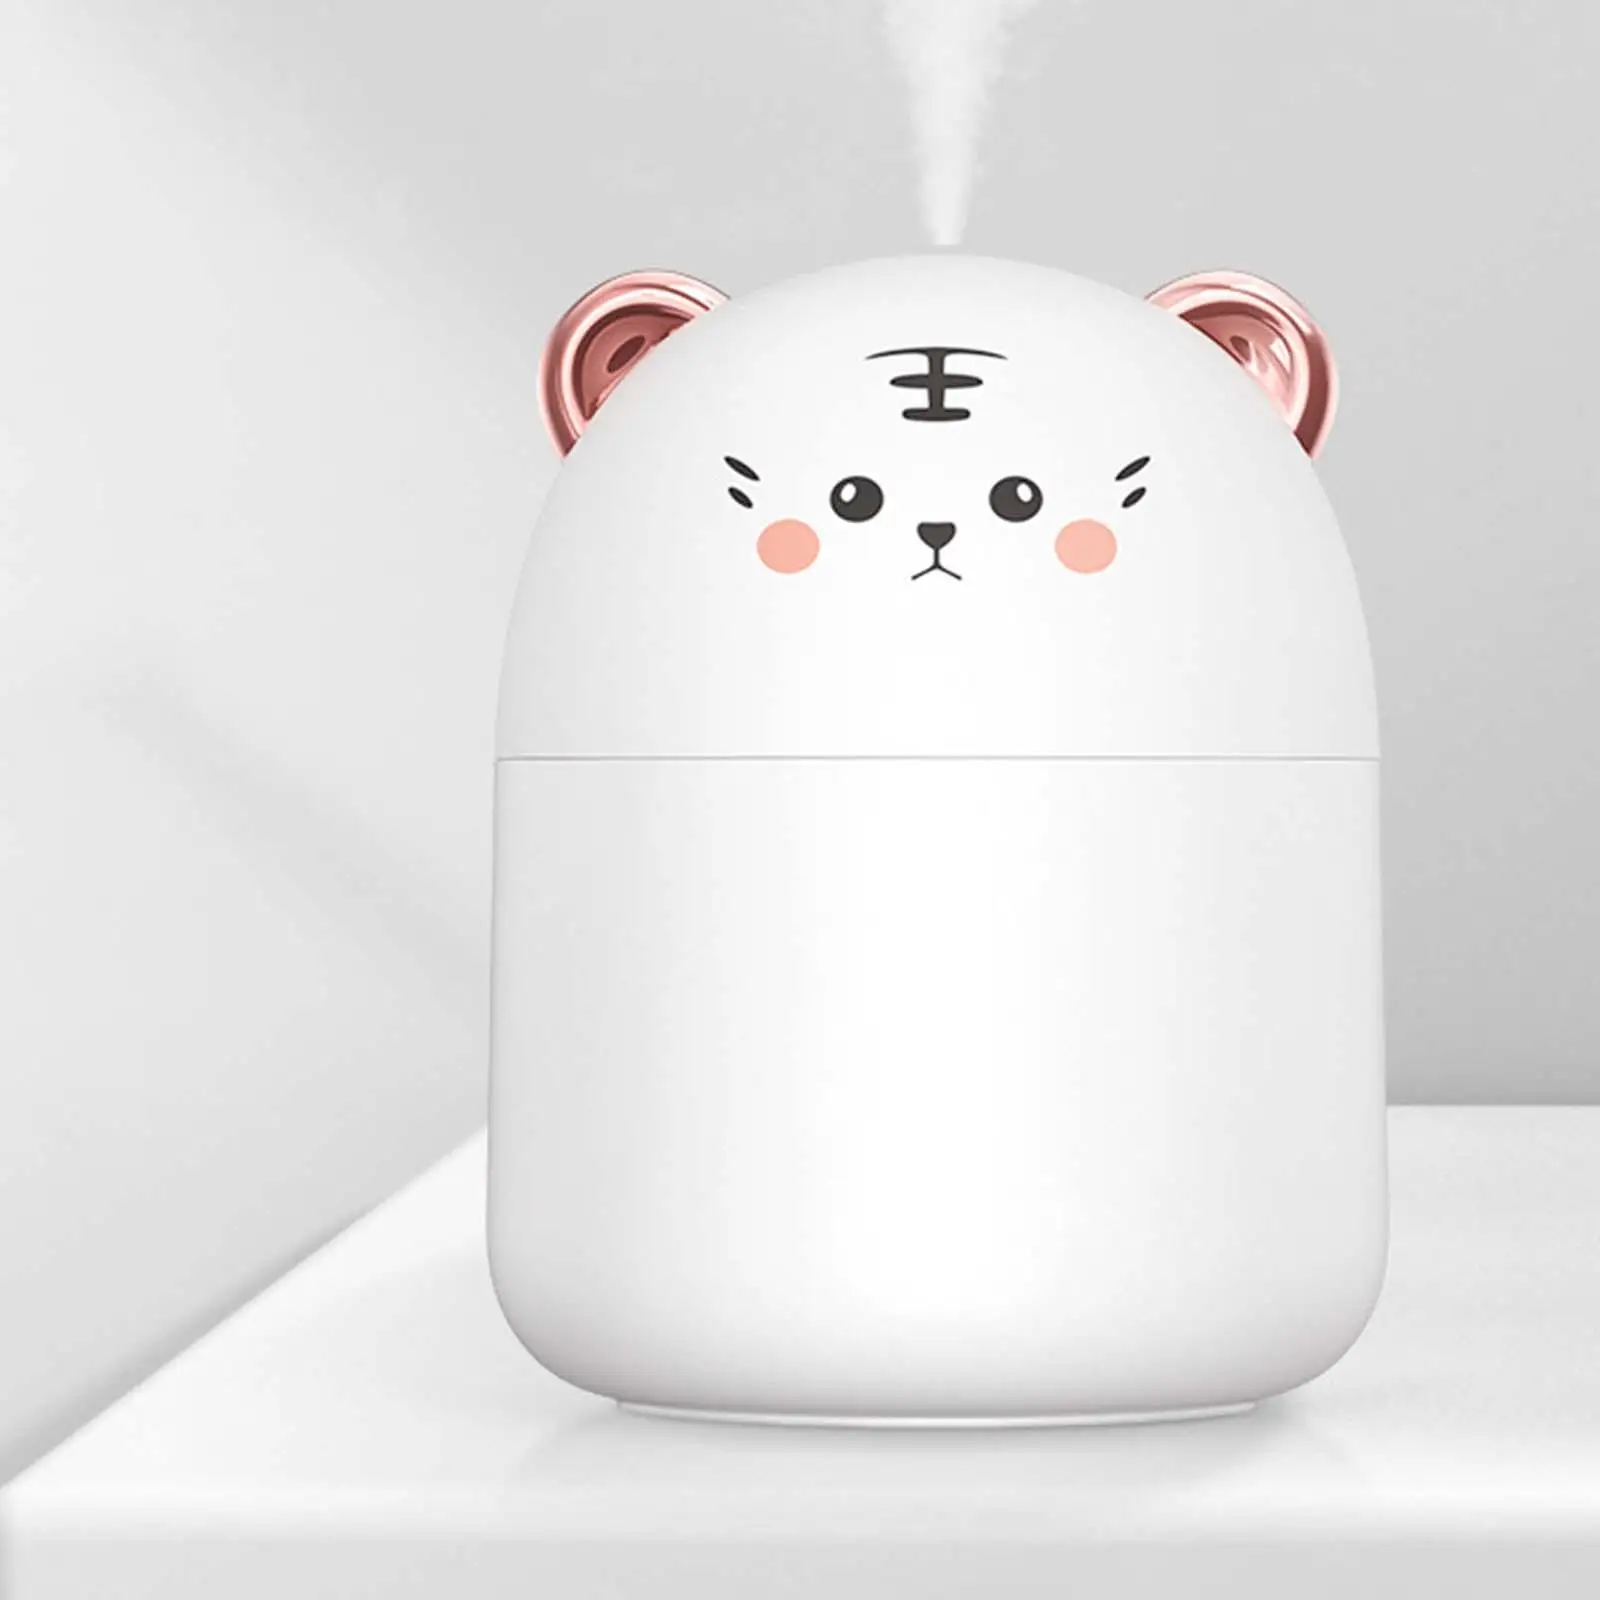 Desktop Humidifier with Colorful Atmosphere Light 250ml Capacity Cool Mist Aroma Diffuser Home Bedroom Humidifier Purifier